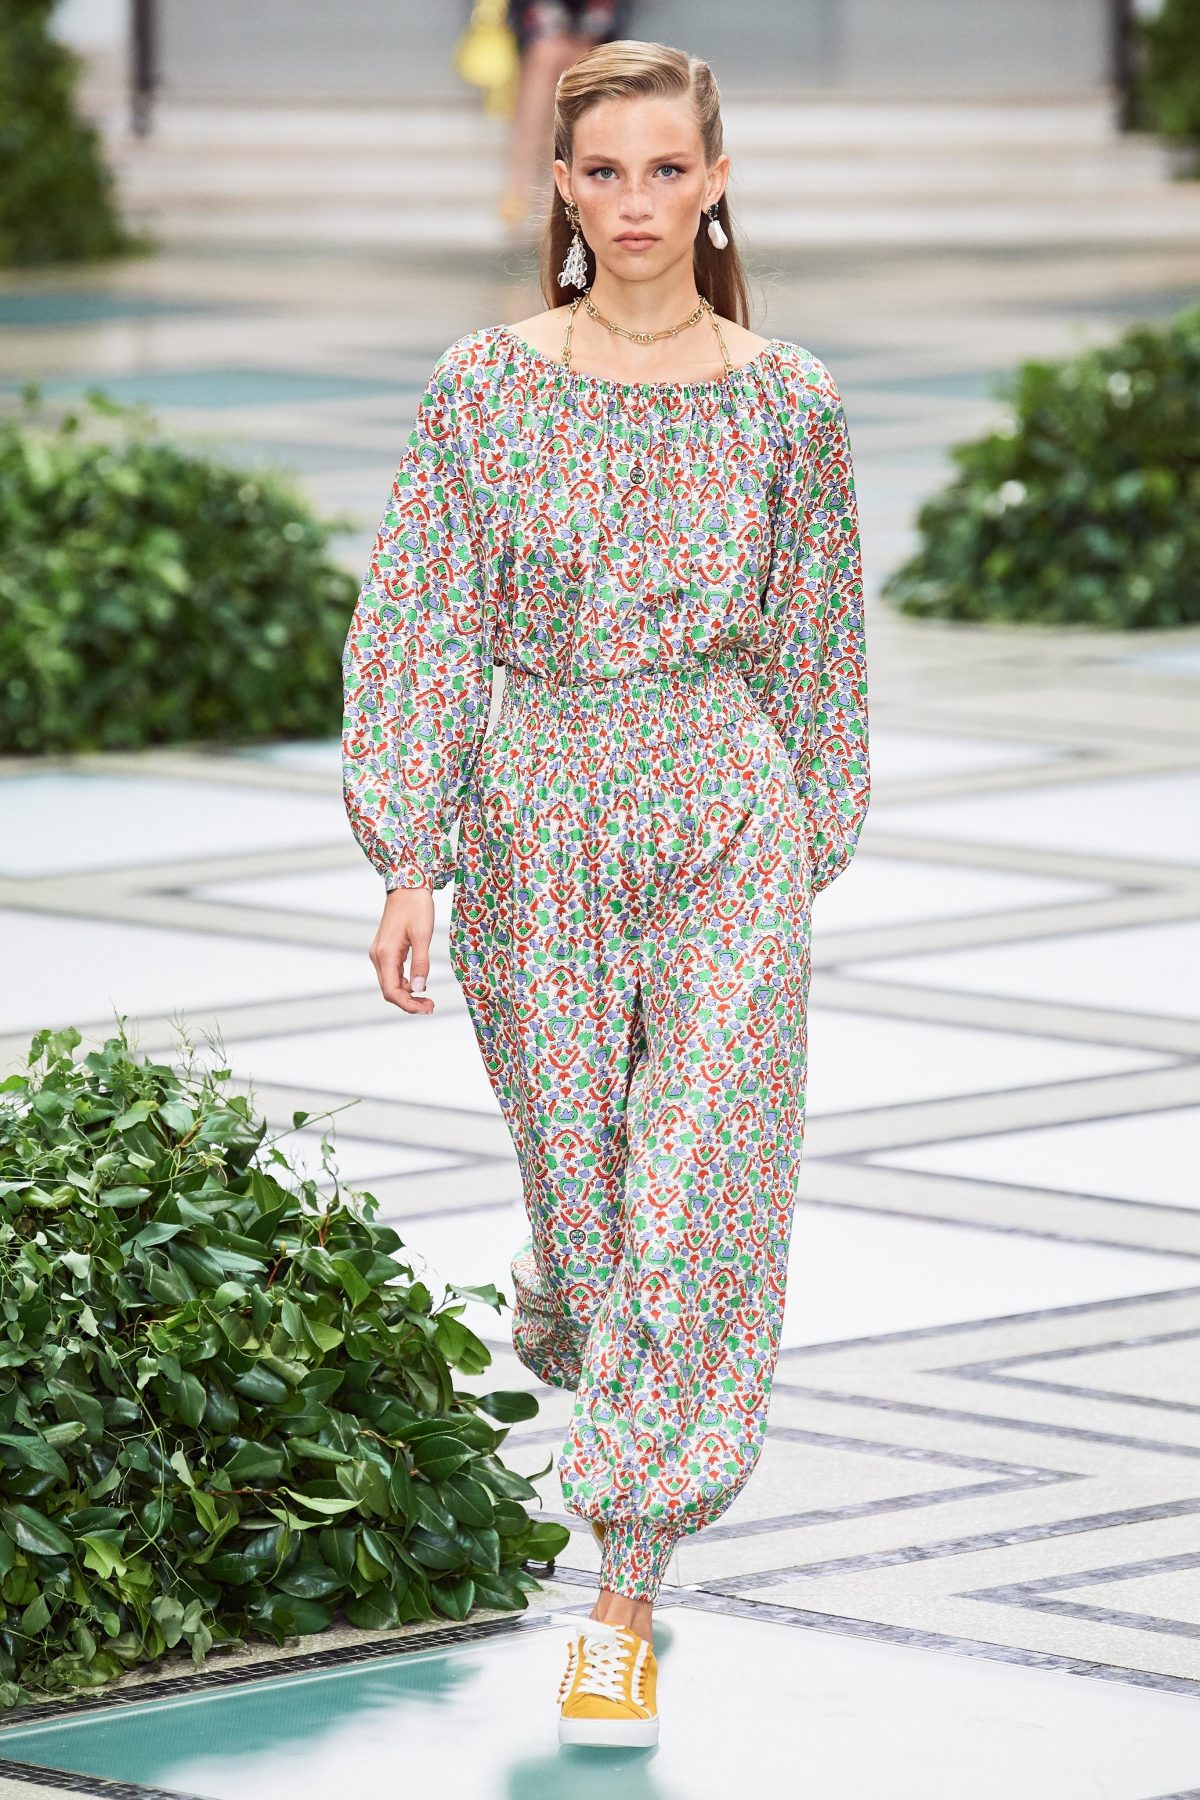 Tory Burch Spring/Summer 2020 Ready-To-Wear Runway Show Review